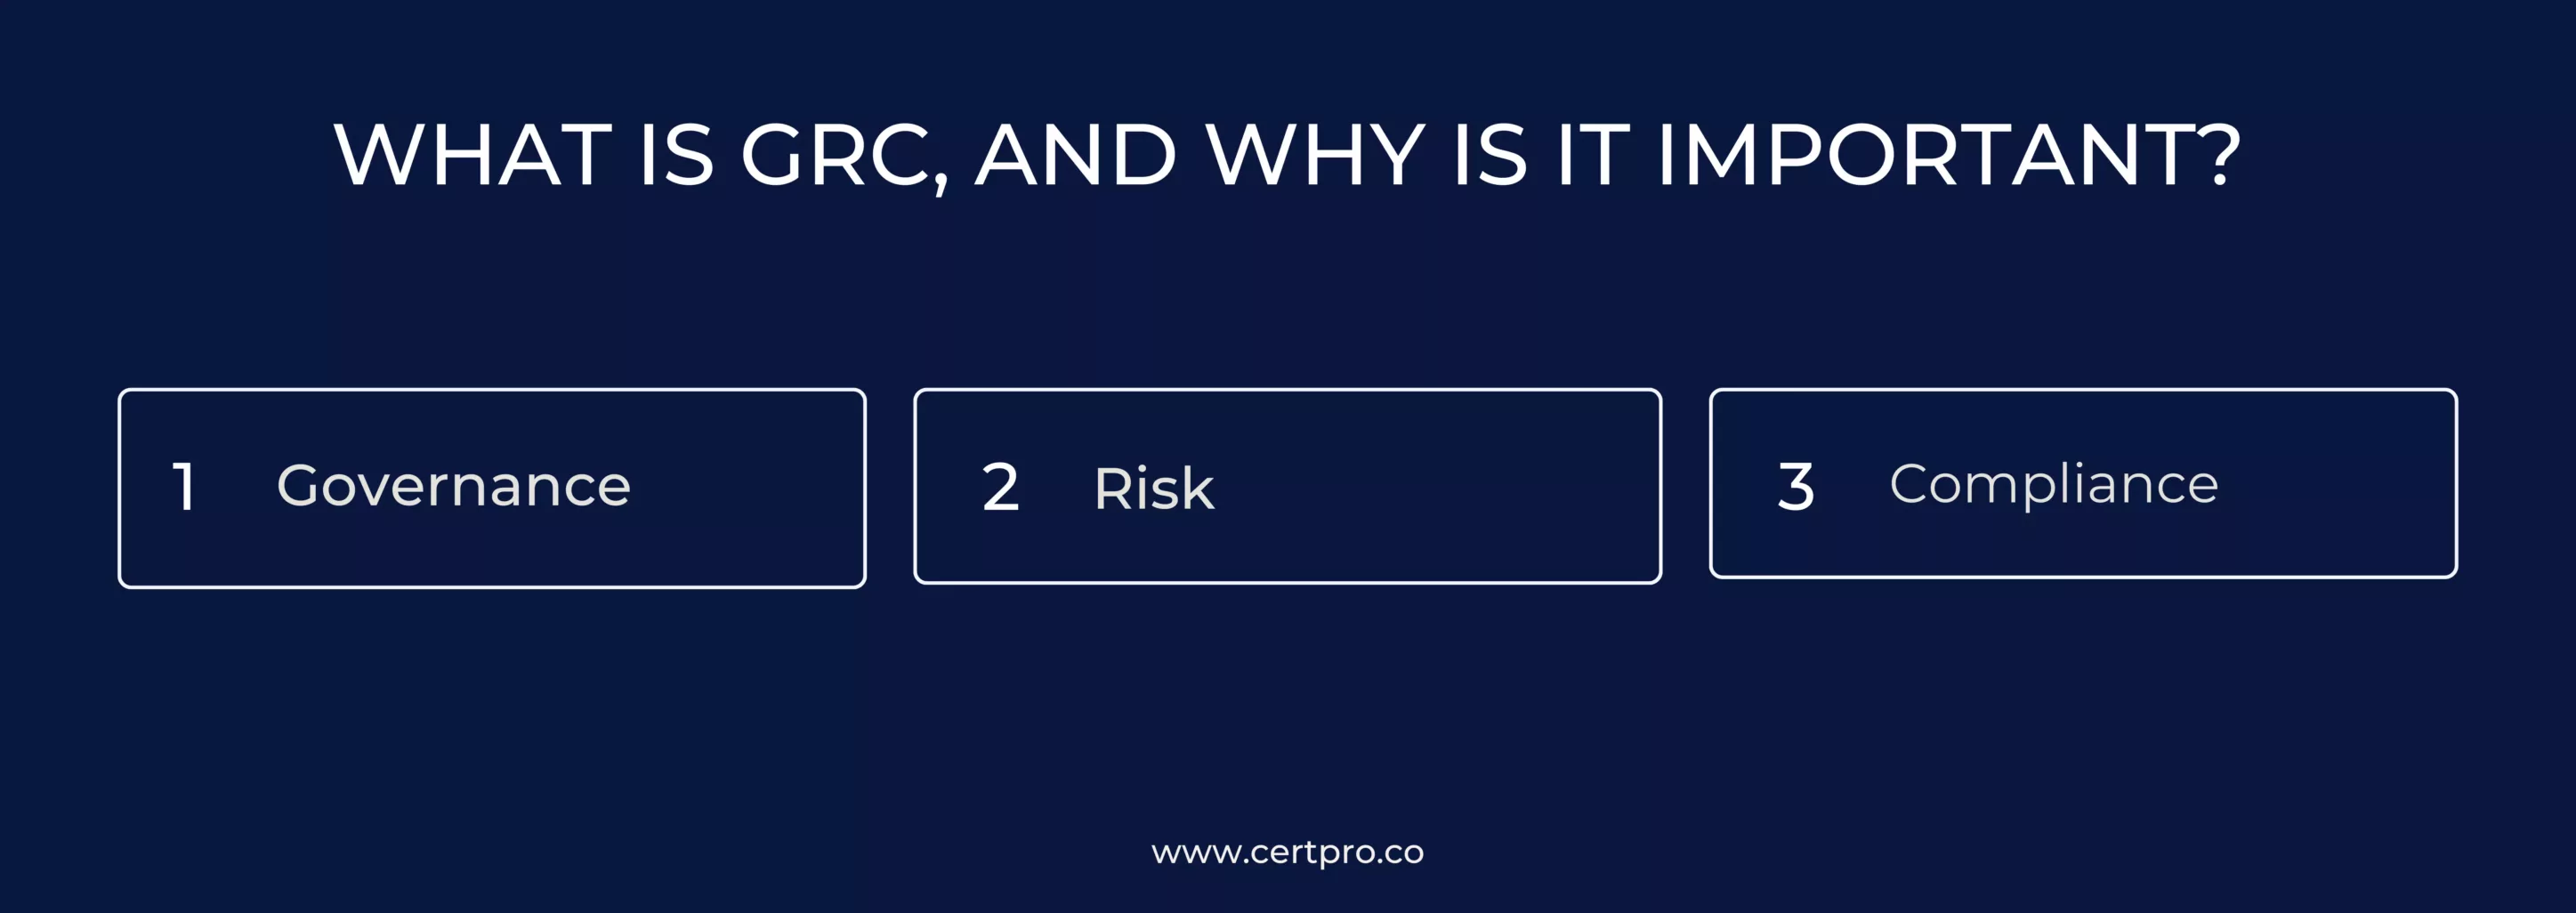 What is GRC